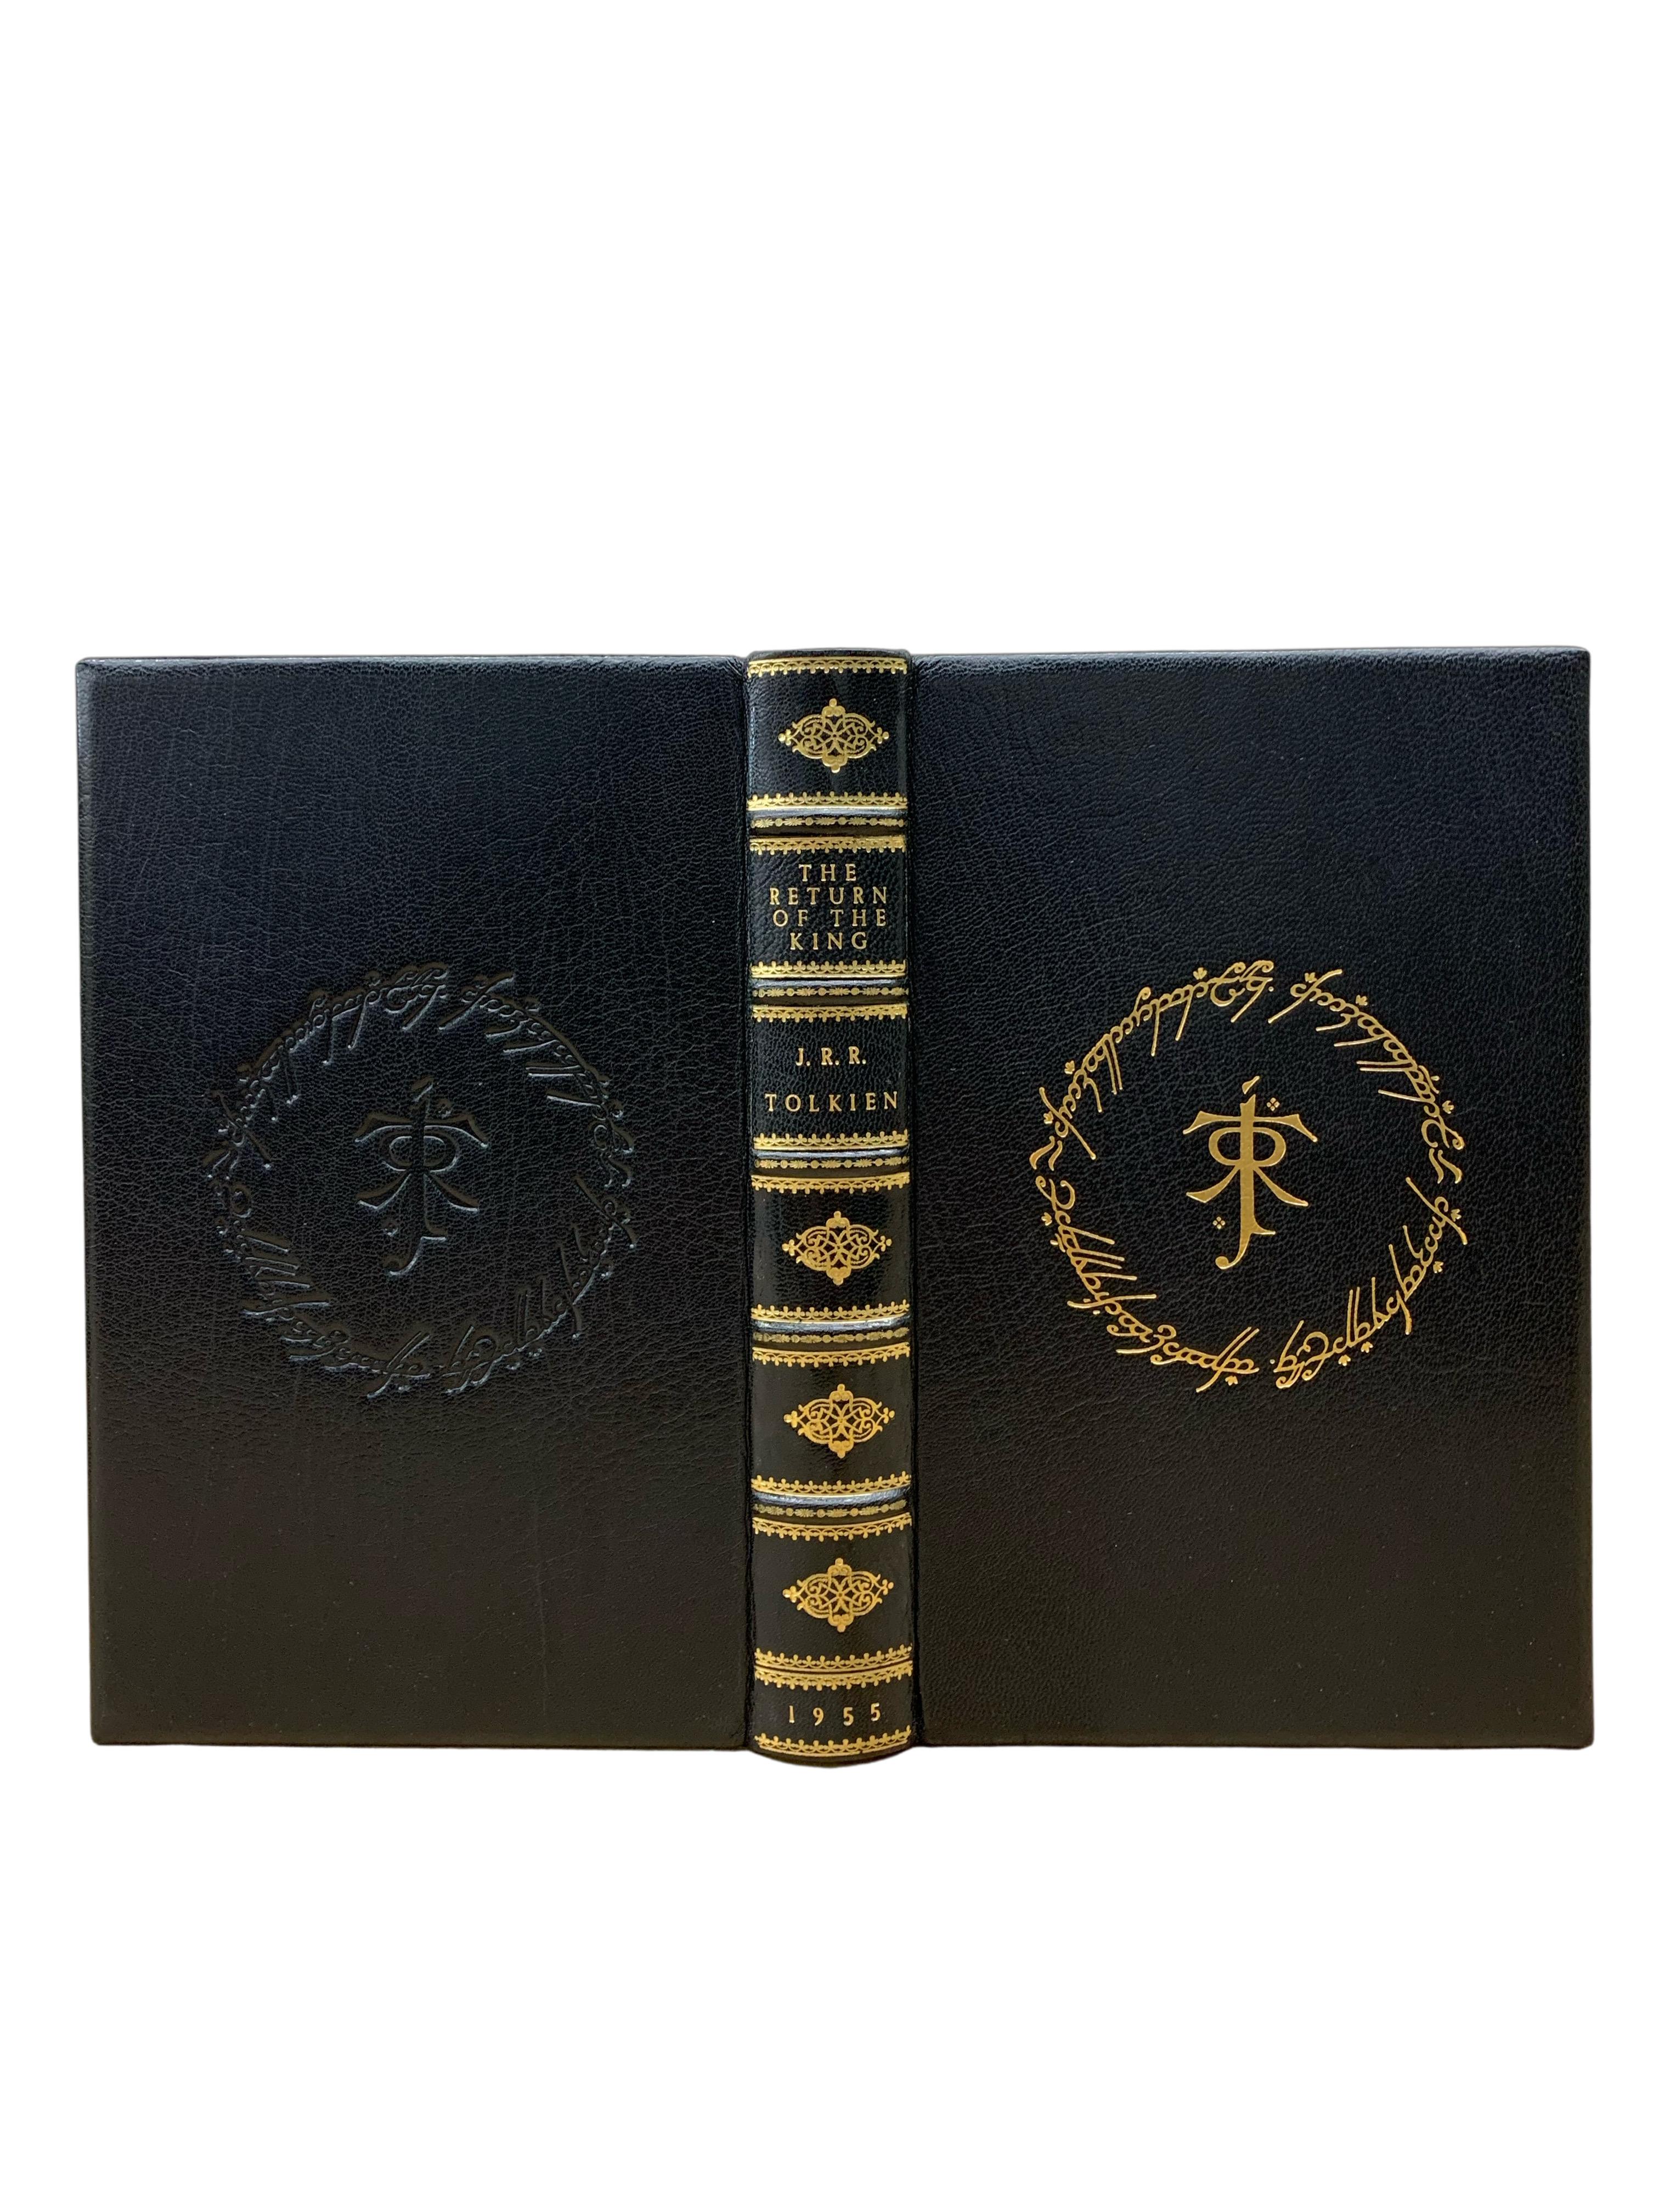 The Lord of the Rings Trilogy by J.R.R. Tolkien, In Three Vol. Complete, 1955-56 In Good Condition In Colorado Springs, CO